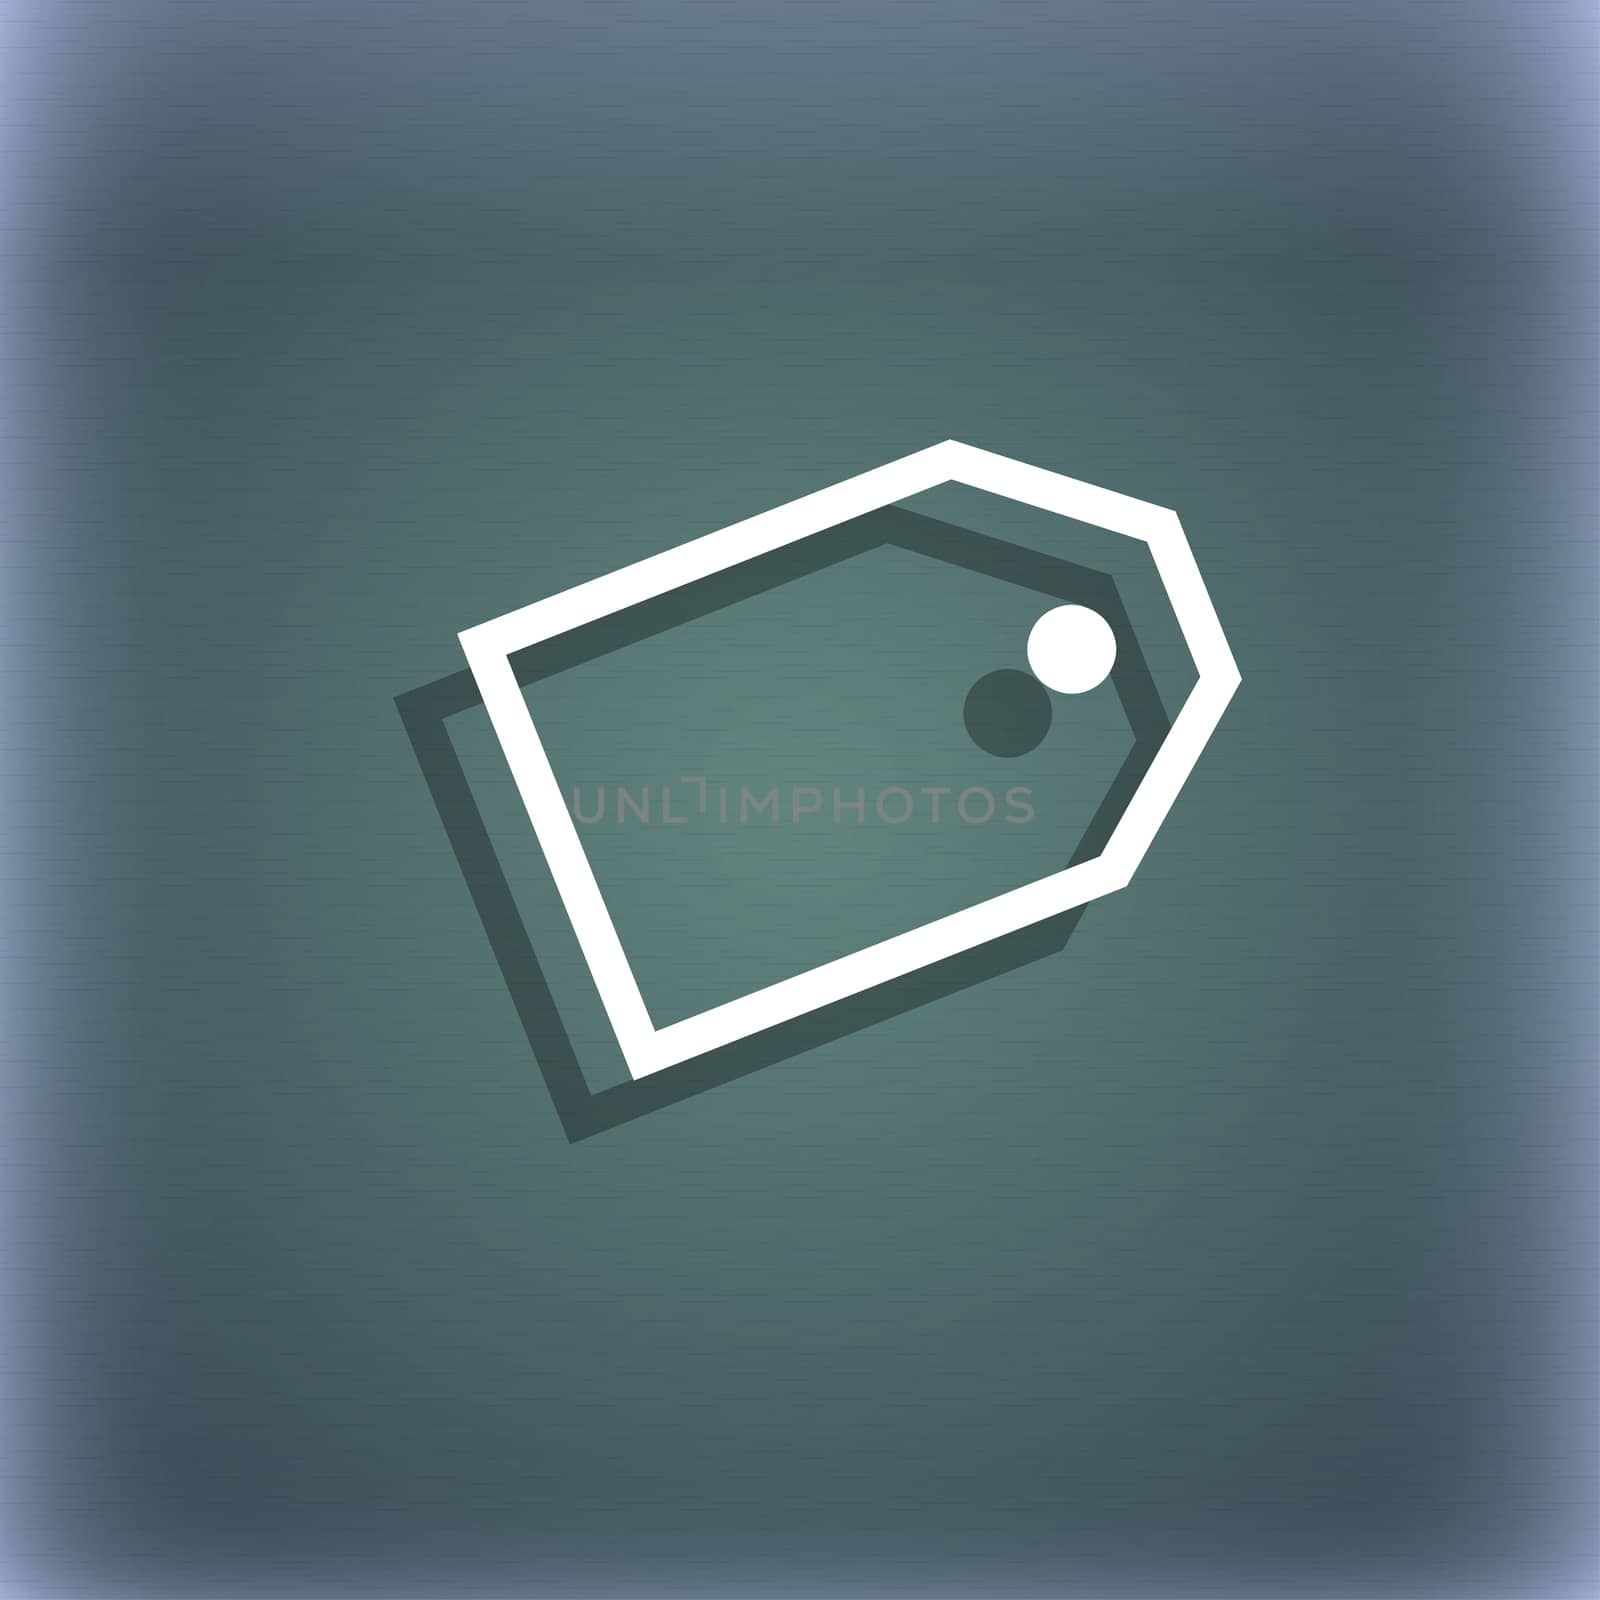 Web stickers icon symbol on the blue-green abstract background with shadow and space for your text. illustration